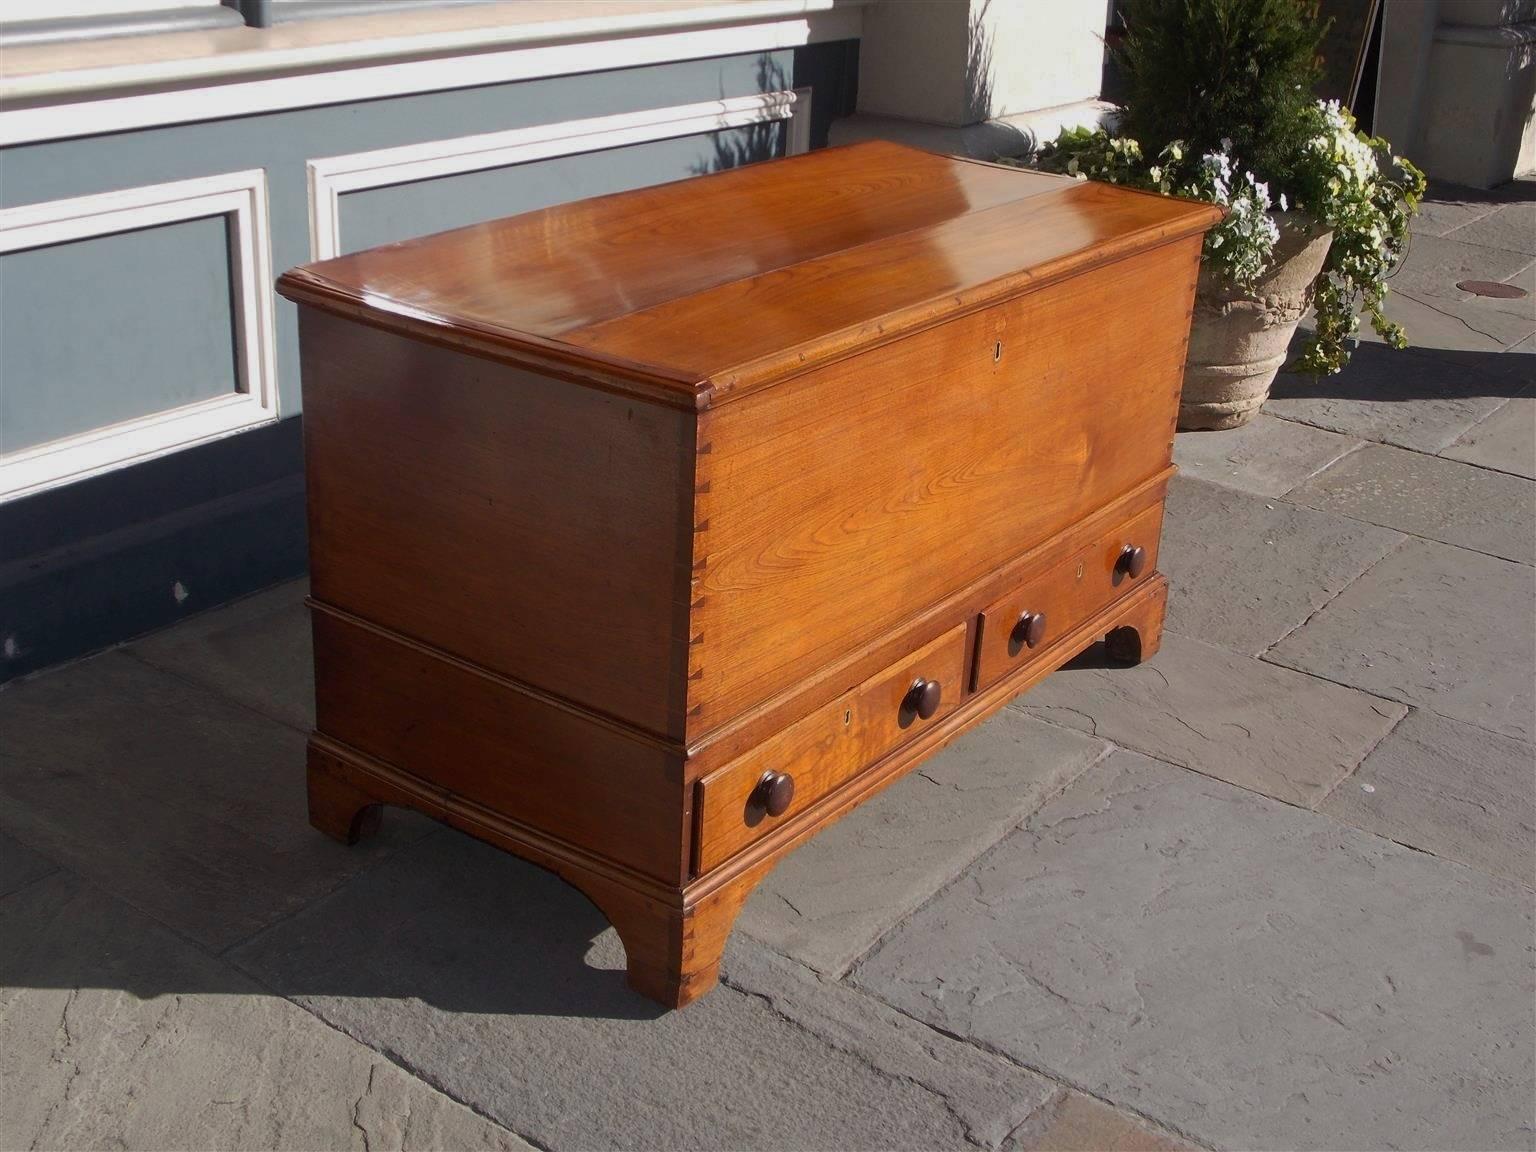 blanket chest with drawers